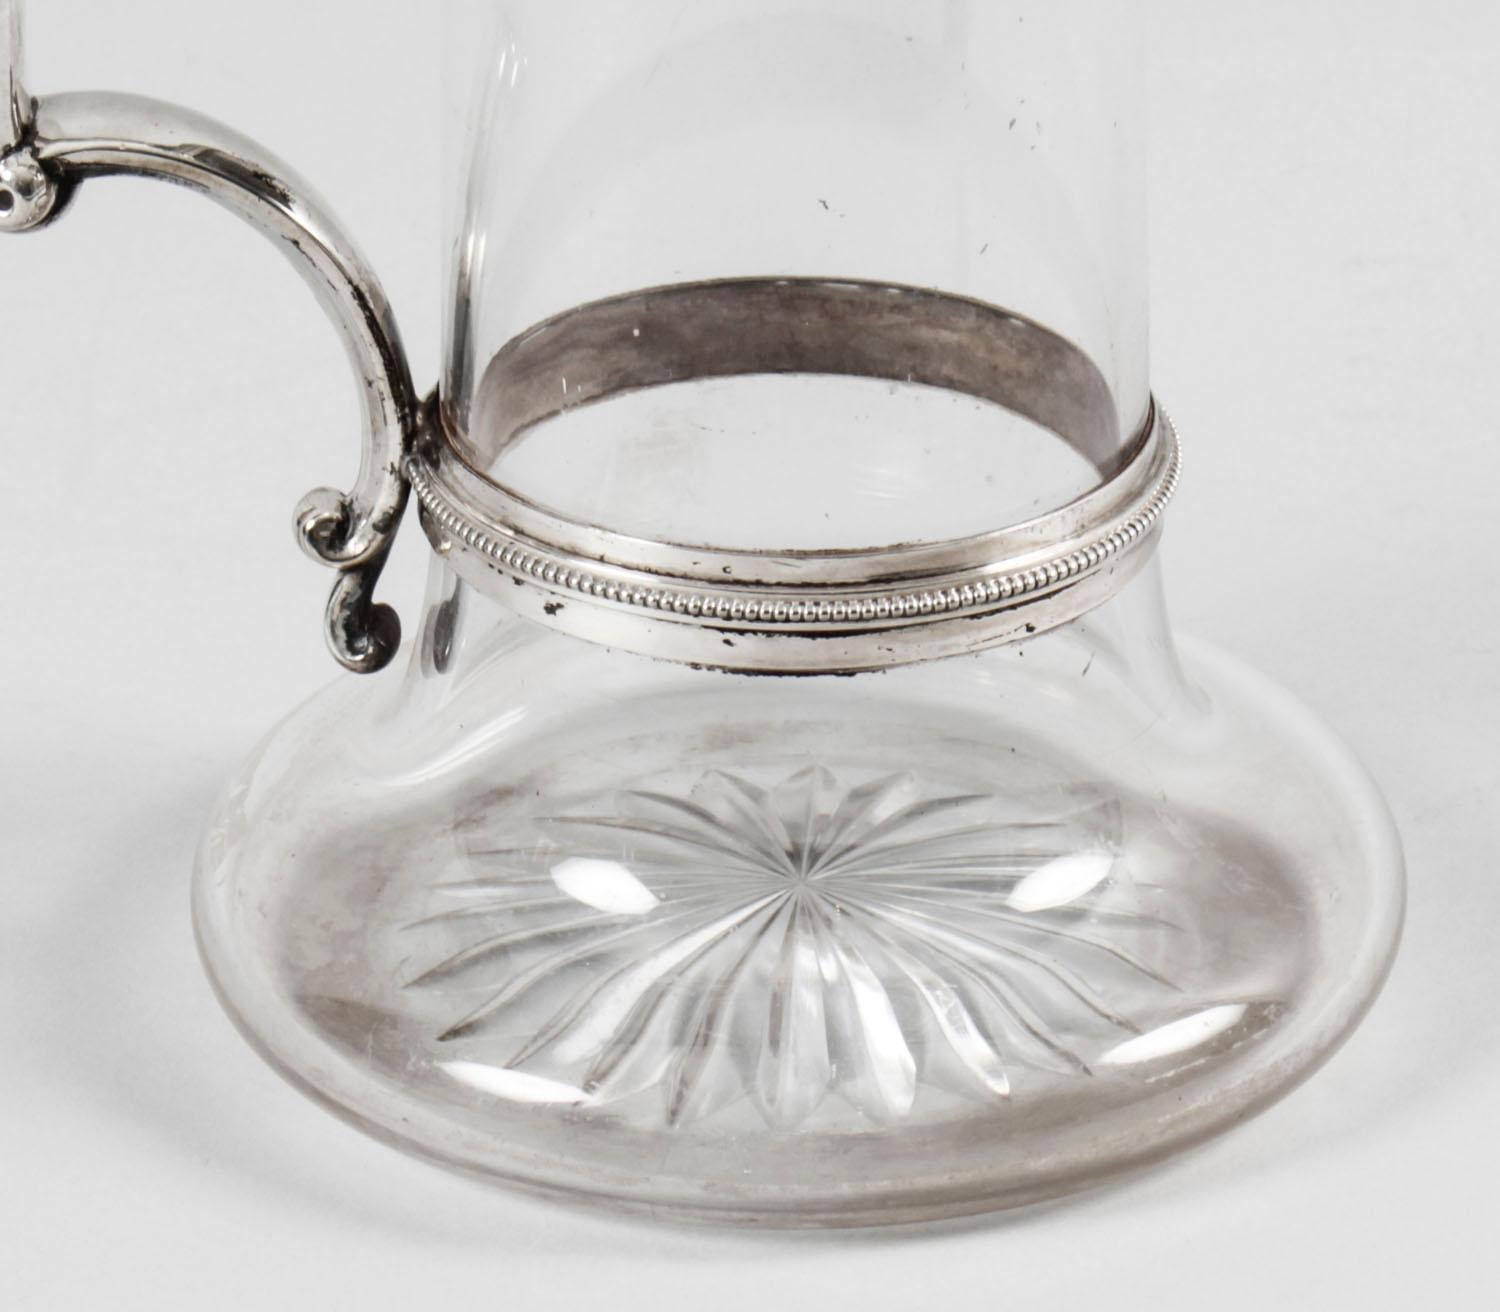 Antique Victorian Silver Plated and Cut Crystal Claret Jug Elkington & Co 19th C For Sale 5